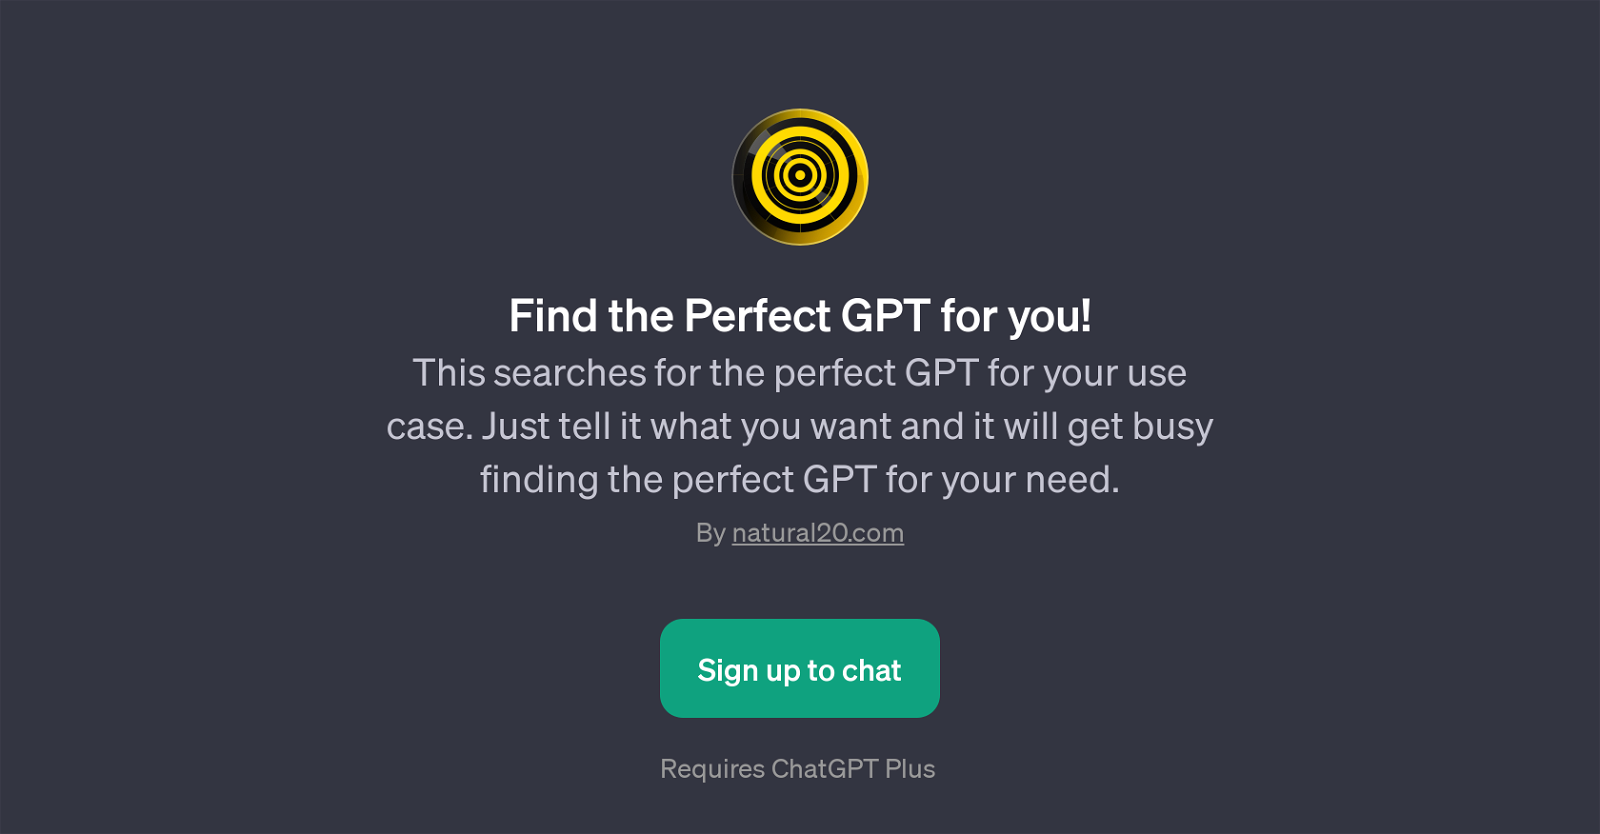 Find the Perfect GPT for you website